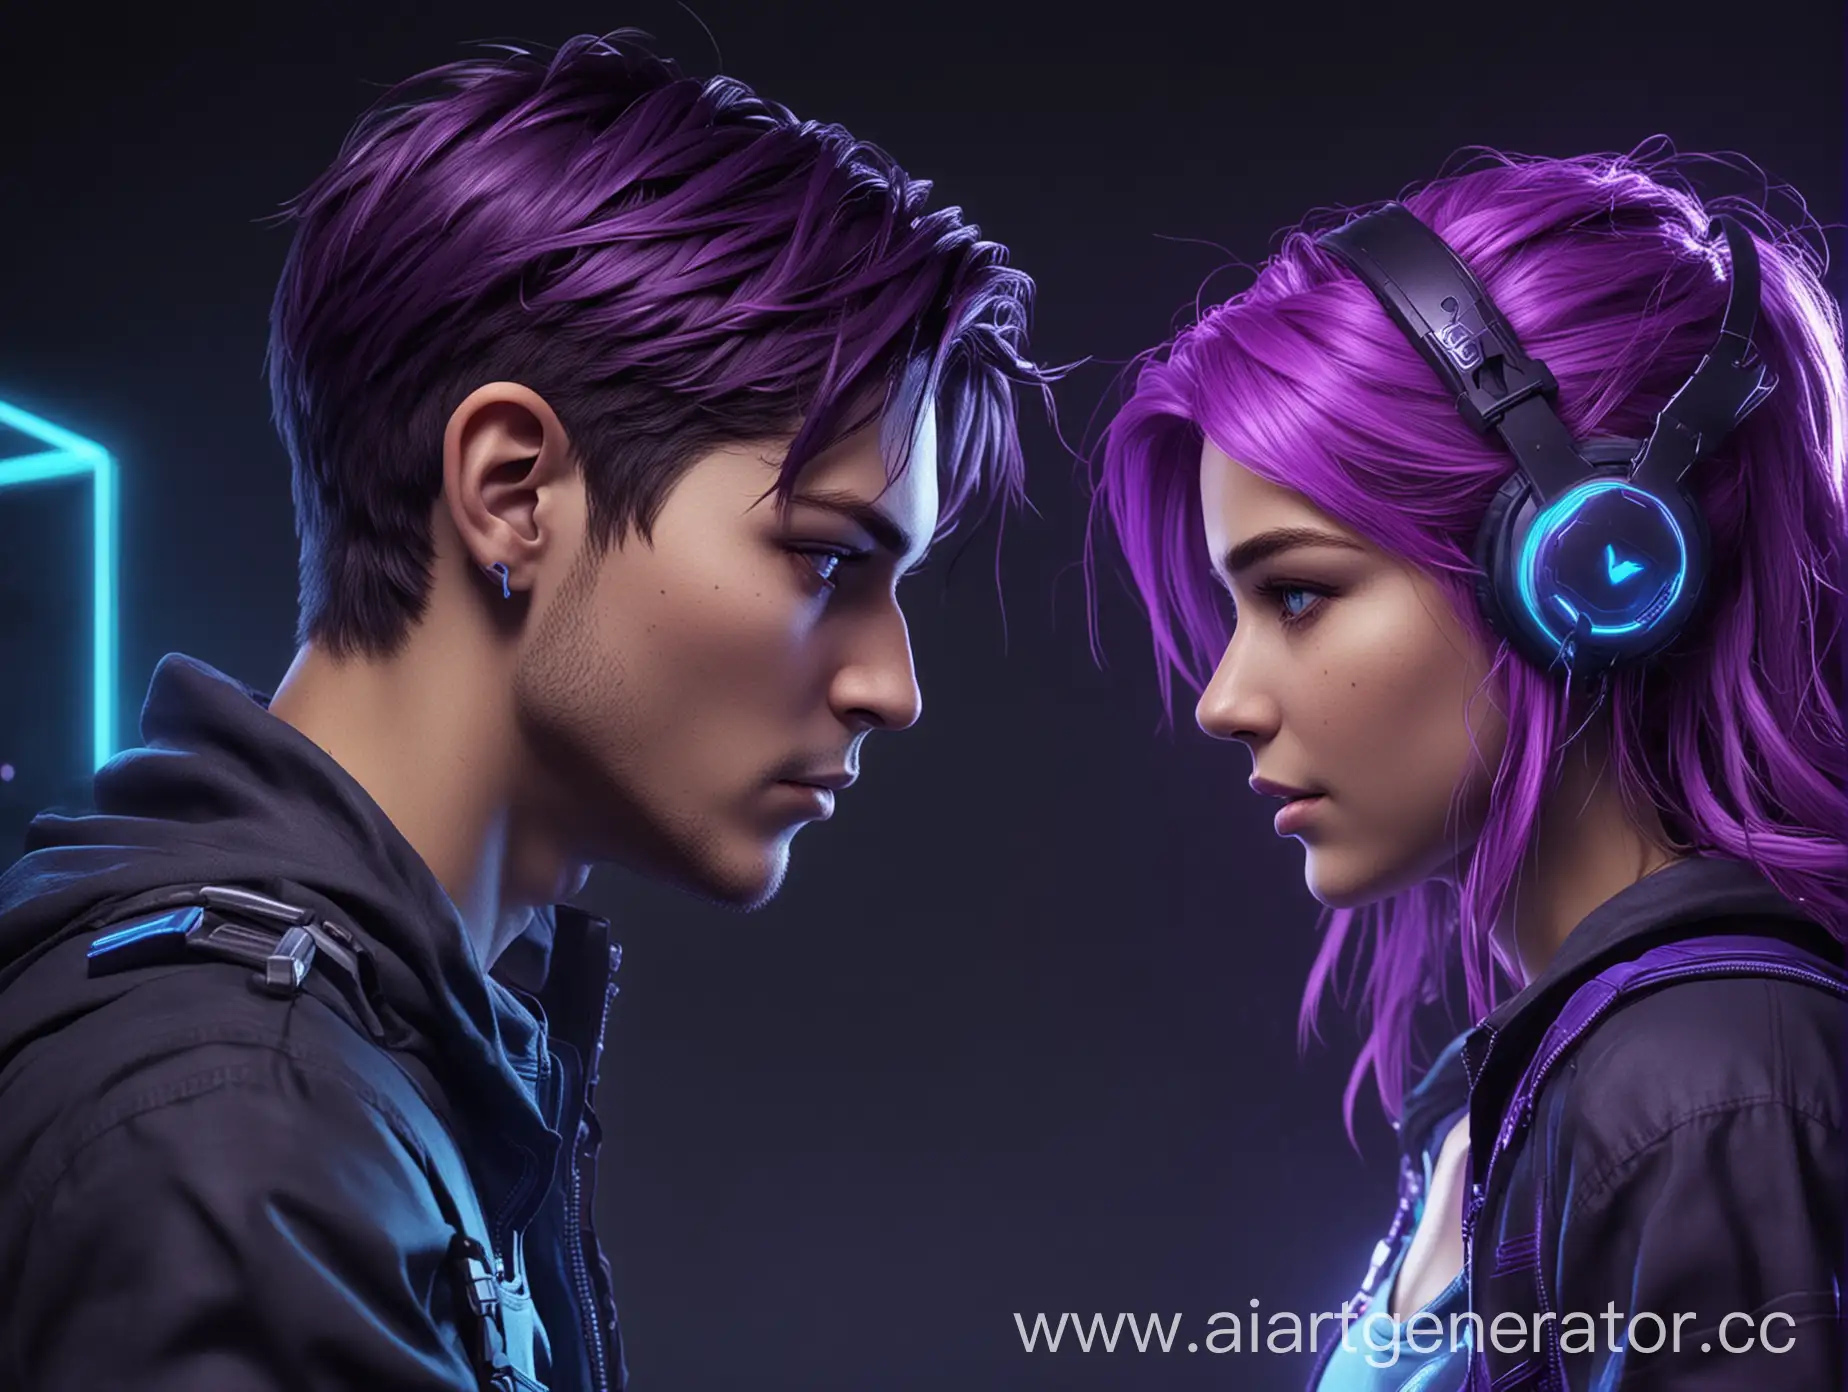 Competitive-Gaming-Male-and-Female-Characters-Engaged-in-Neon-Video-Game-Duel